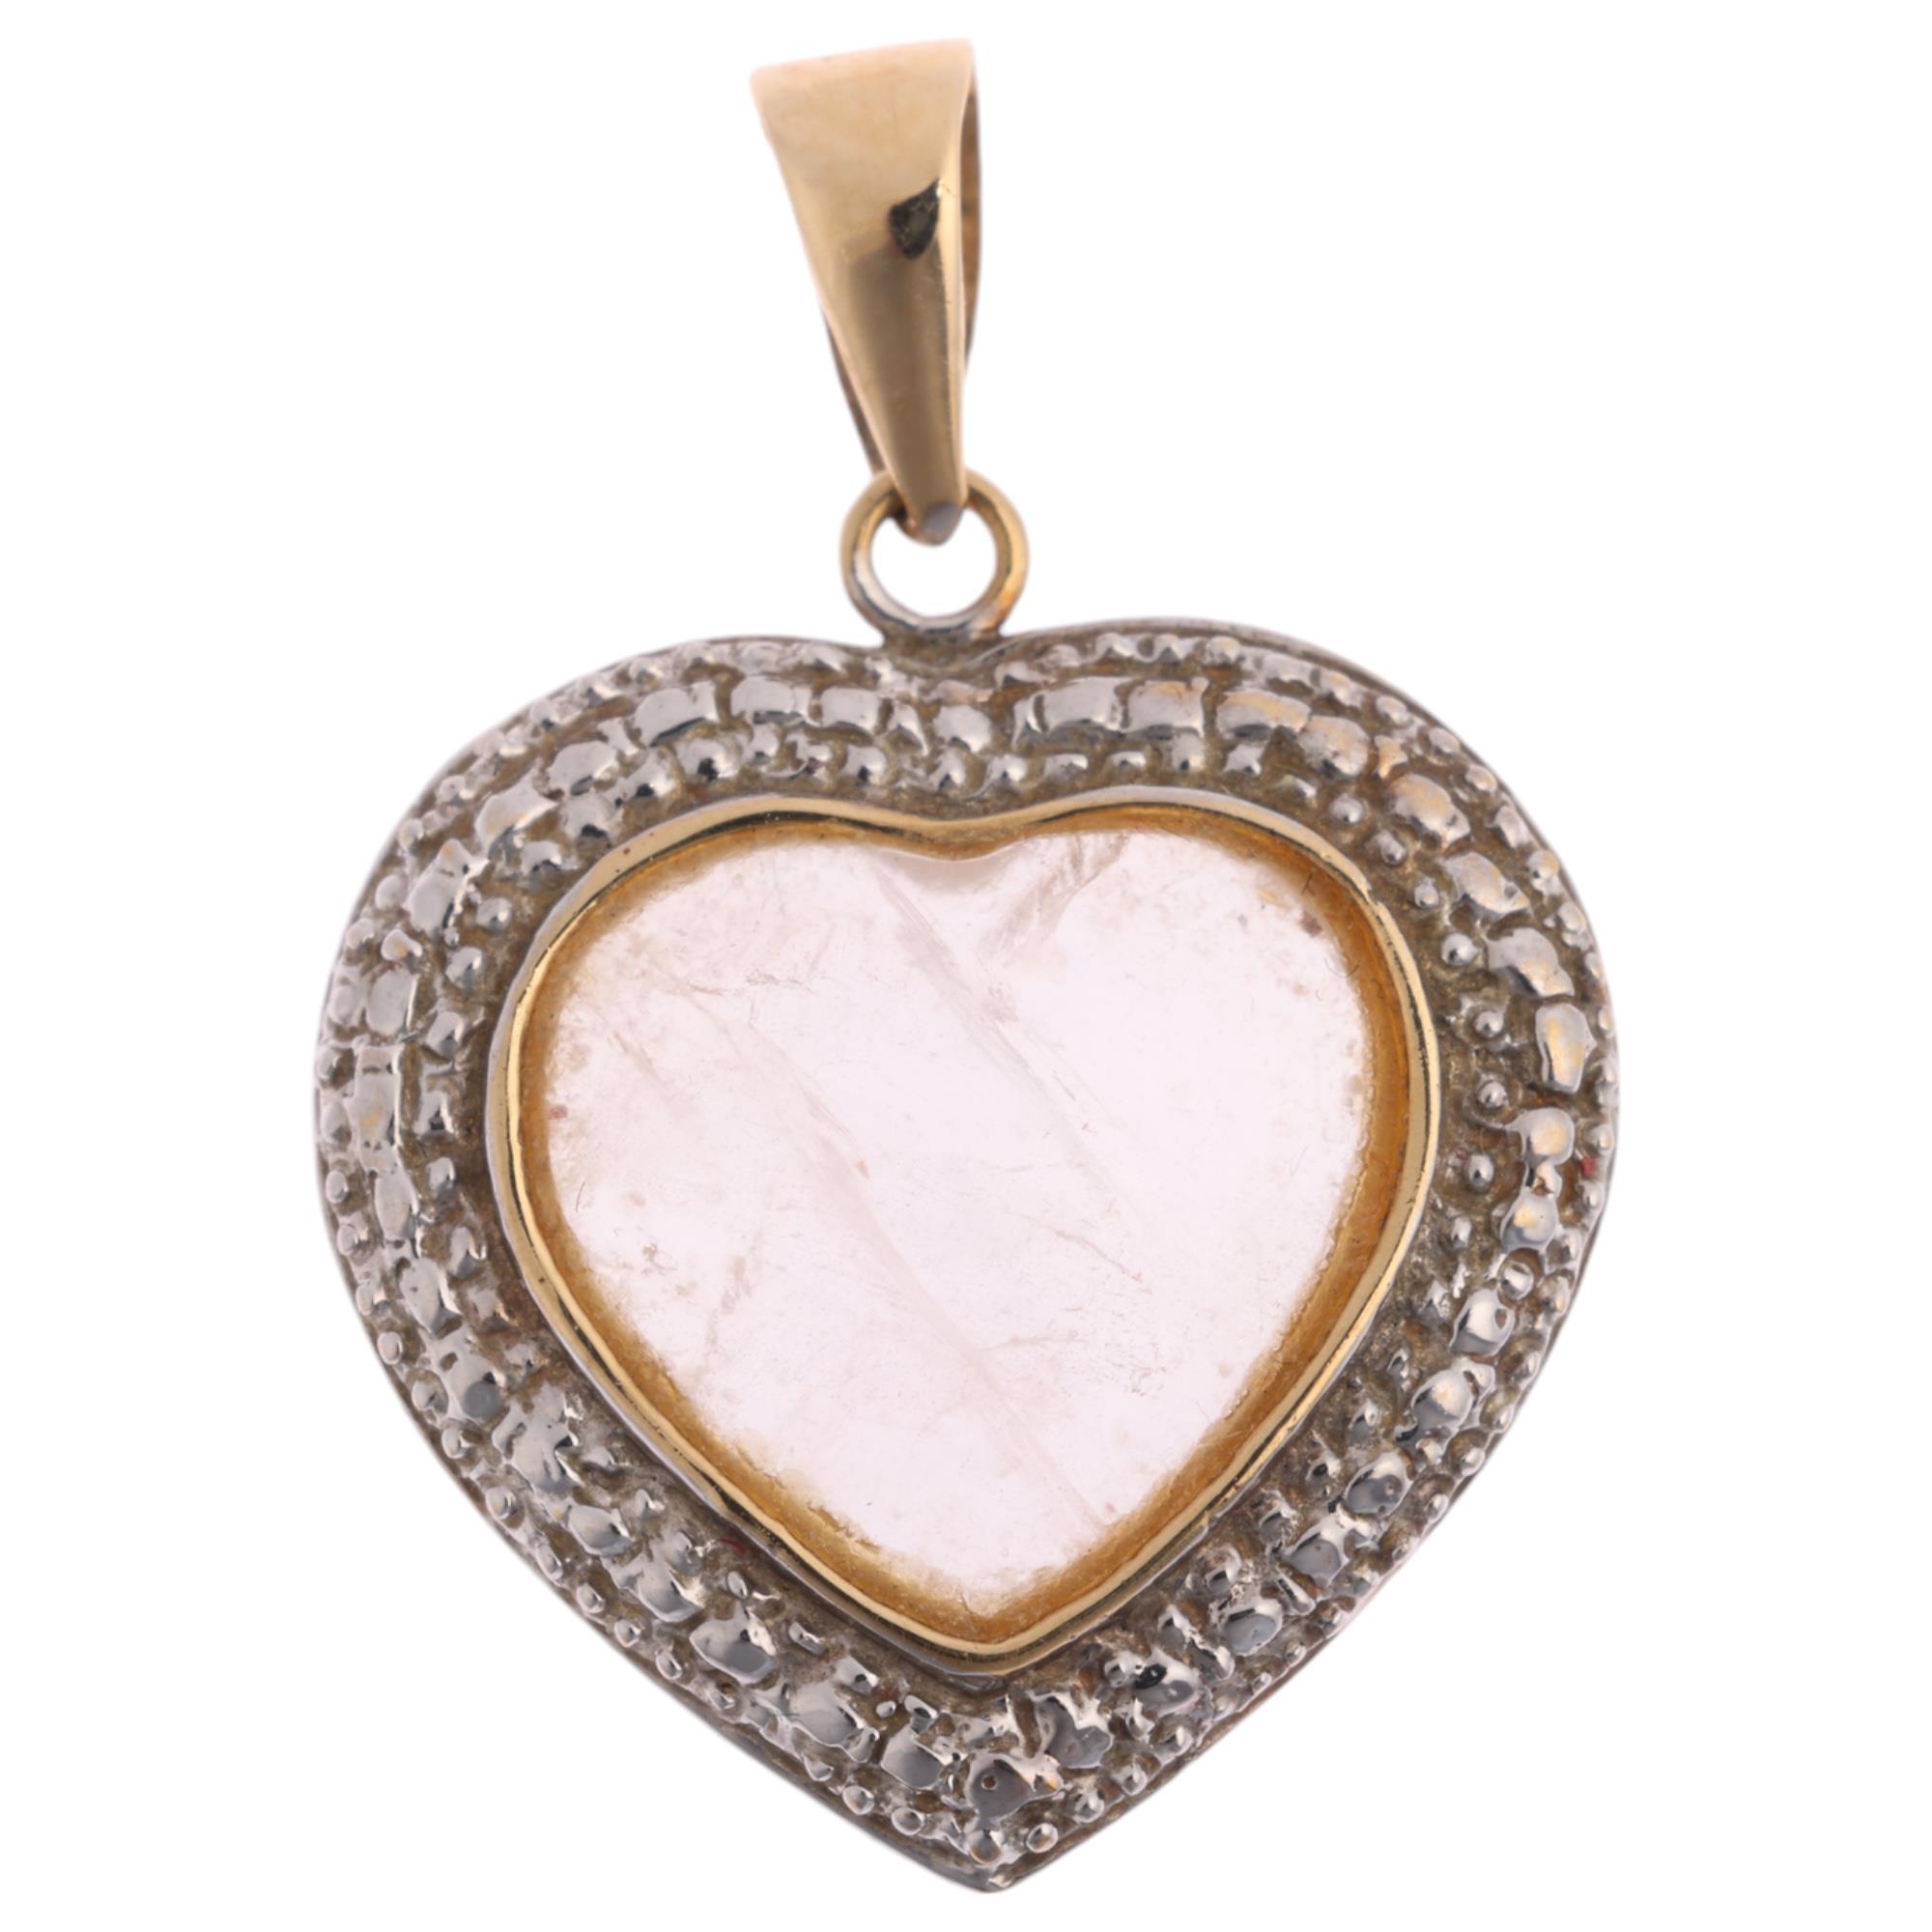 A 9ct gold moonstone heart pendant, 24.7mm, 2.3g Condition Report: No damage or repair, only light